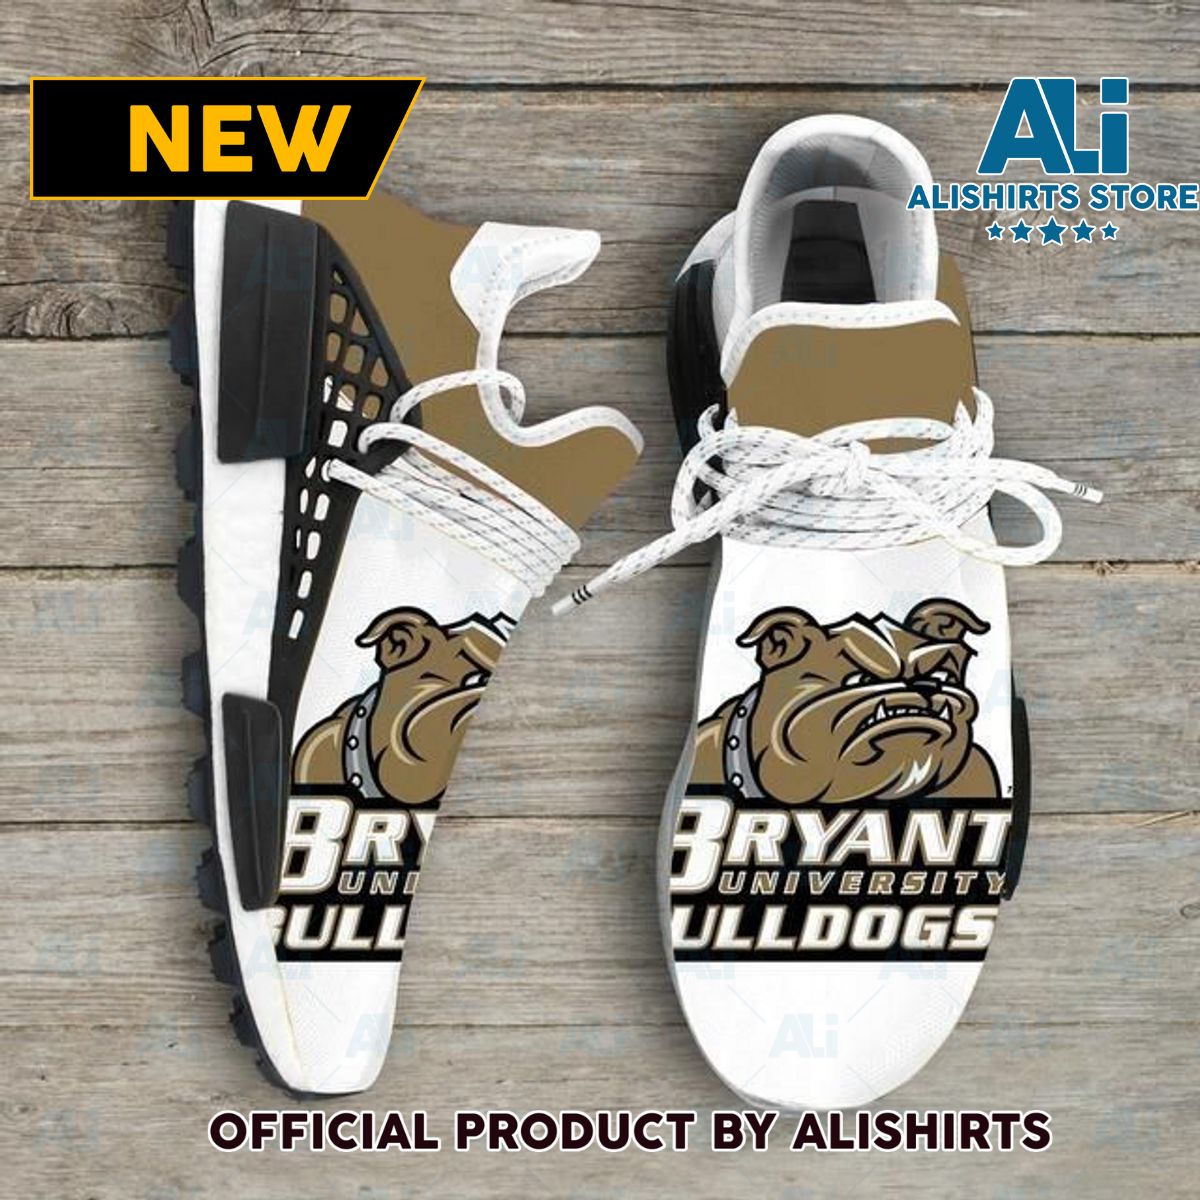 Bryant Bulldogs Ncaa NMD Human Race shoes Customized Adidas NMD Sneakers